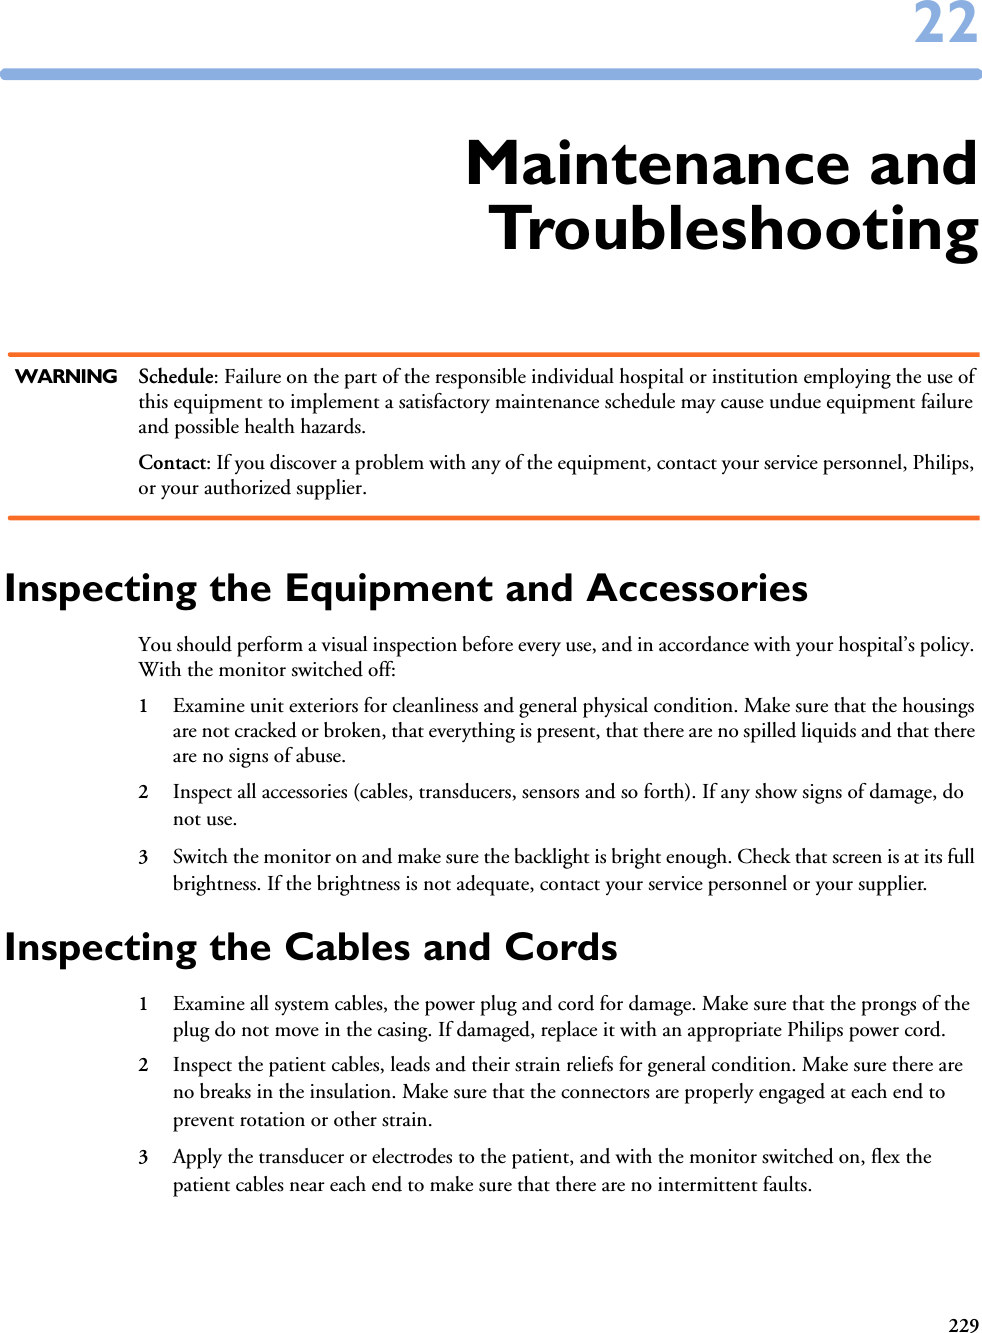 2292222Maintenance andTroubleshootingWARNING Schedule: Failure on the part of the responsible individual hospital or institution employing the use of this equipment to implement a satisfactory maintenance schedule may cause undue equipment failure and possible health hazards.Contact: If you discover a problem with any of the equipment, contact your service personnel, Philips, or your authorized supplier.Inspecting the Equipment and AccessoriesYou should perform a visual inspection before every use, and in accordance with your hospital’s policy. With the monitor switched off:1Examine unit exteriors for cleanliness and general physical condition. Make sure that the housings are not cracked or broken, that everything is present, that there are no spilled liquids and that there are no signs of abuse.2Inspect all accessories (cables, transducers, sensors and so forth). If any show signs of damage, do not use.3Switch the monitor on and make sure the backlight is bright enough. Check that screen is at its full brightness. If the brightness is not adequate, contact your service personnel or your supplier.Inspecting the Cables and Cords1Examine all system cables, the power plug and cord for damage. Make sure that the prongs of the plug do not move in the casing. If damaged, replace it with an appropriate Philips power cord.2Inspect the patient cables, leads and their strain reliefs for general condition. Make sure there are no breaks in the insulation. Make sure that the connectors are properly engaged at each end to prevent rotation or other strain.3Apply the transducer or electrodes to the patient, and with the monitor switched on, flex the patient cables near each end to make sure that there are no intermittent faults.